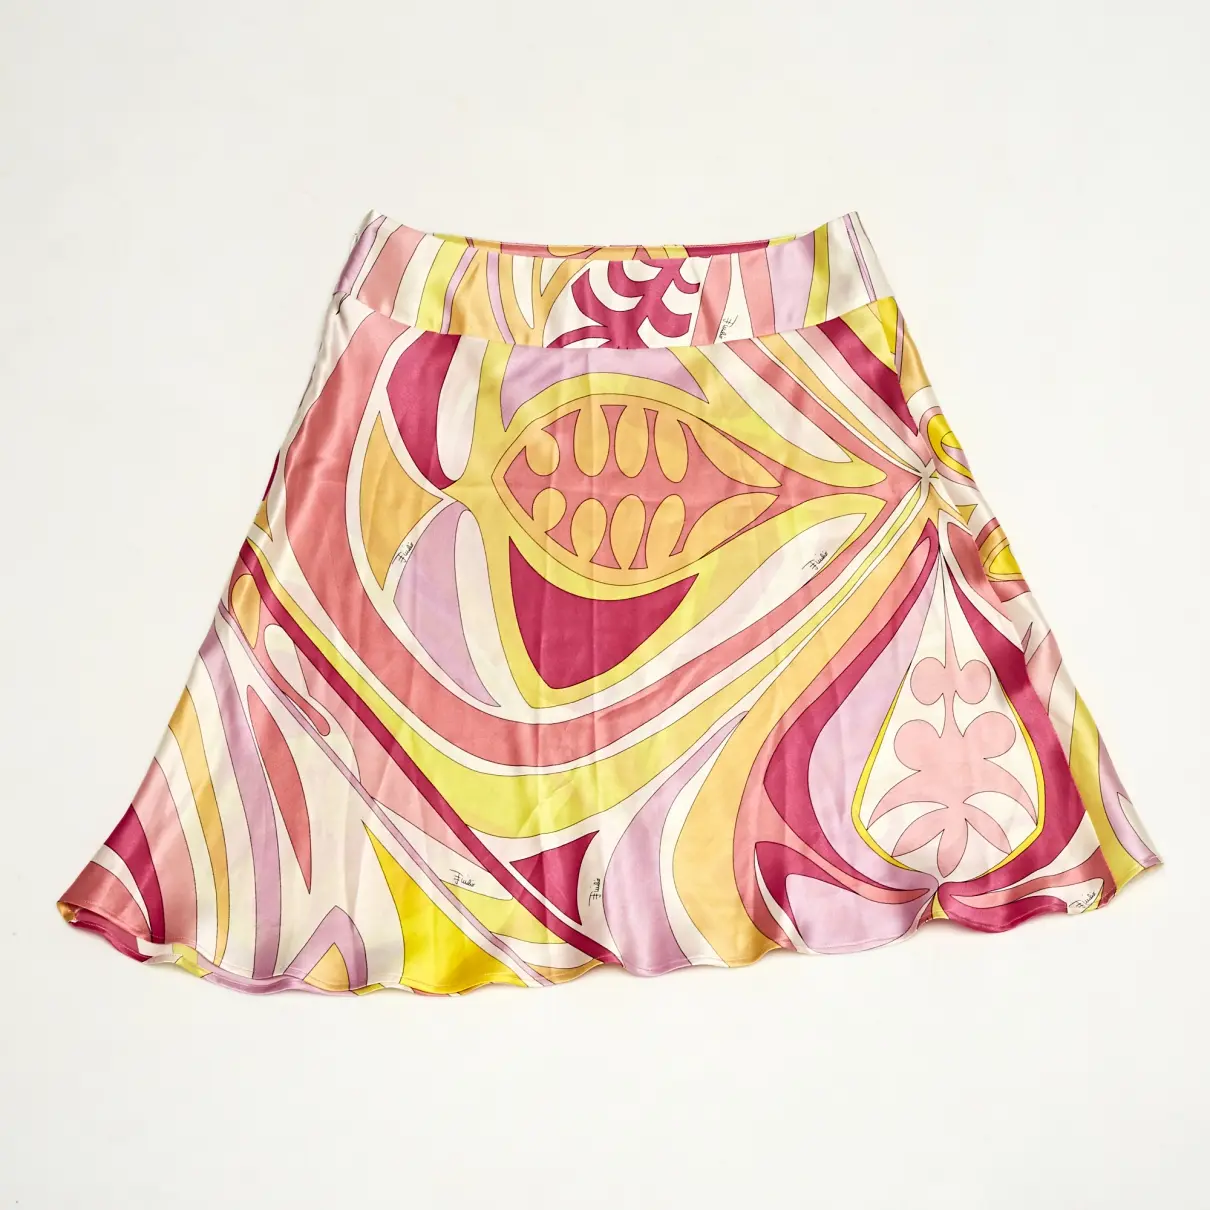 Emilio Pucci Silk mid-length skirt for sale